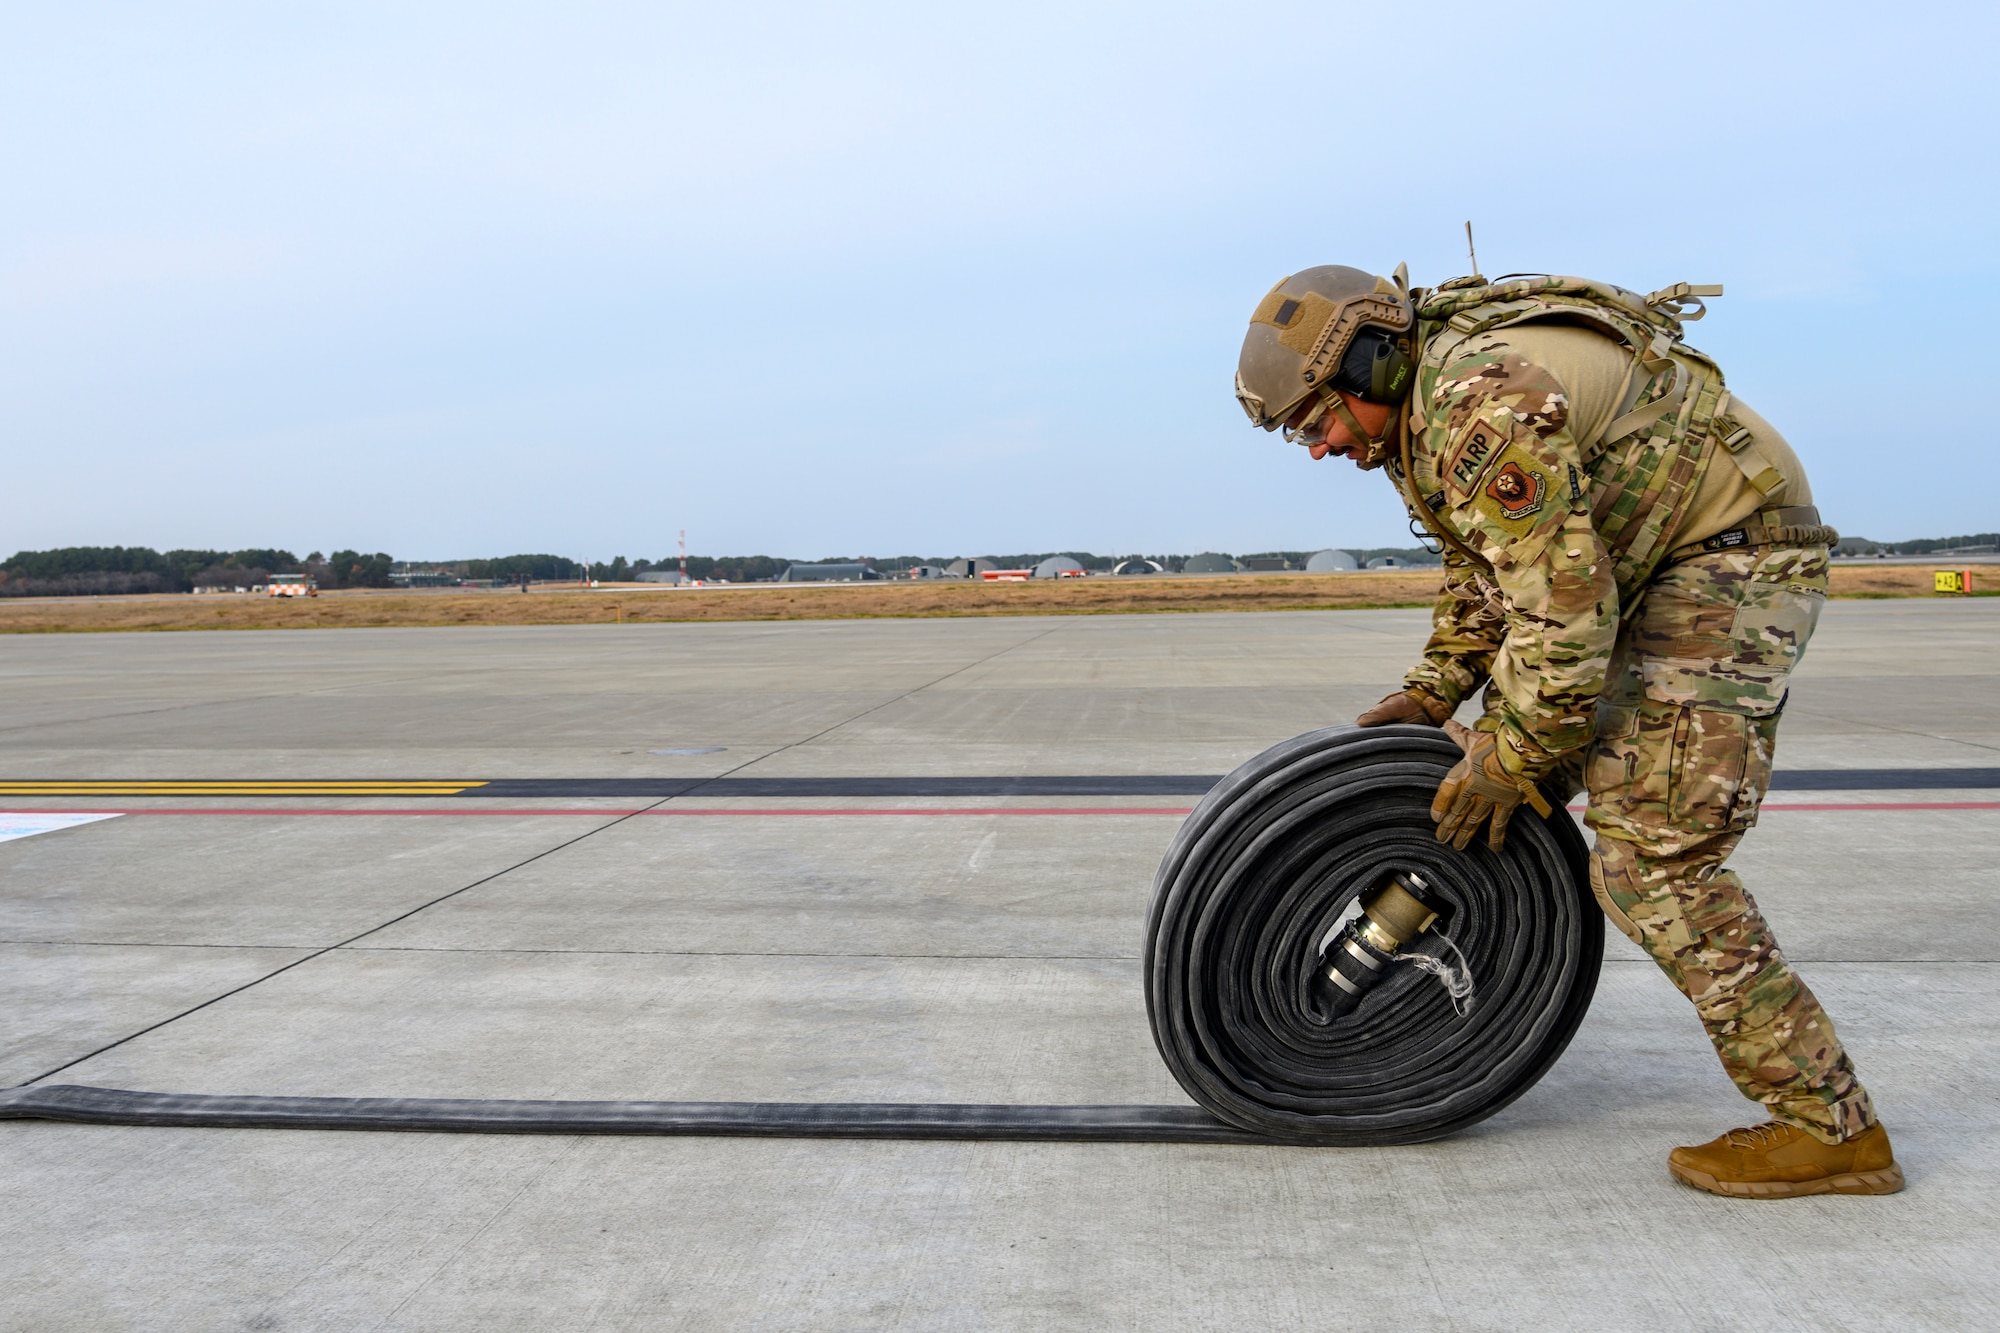 A U.S. Airman with the 1st Special Operations Squadron from Kadena Air Base, Japan, rolls up a fuel hose during a forward area refueling point (FARP) training at Misawa Air Base, Japan, Nov. 18, 2020. FARP ensures the rapid transfer of fuel from one aircraft to another. In this case, an MC-130J and two F-16 Fighting Falcons. (U.S. Air Force photo by Airman 1st Class China M. Shock)